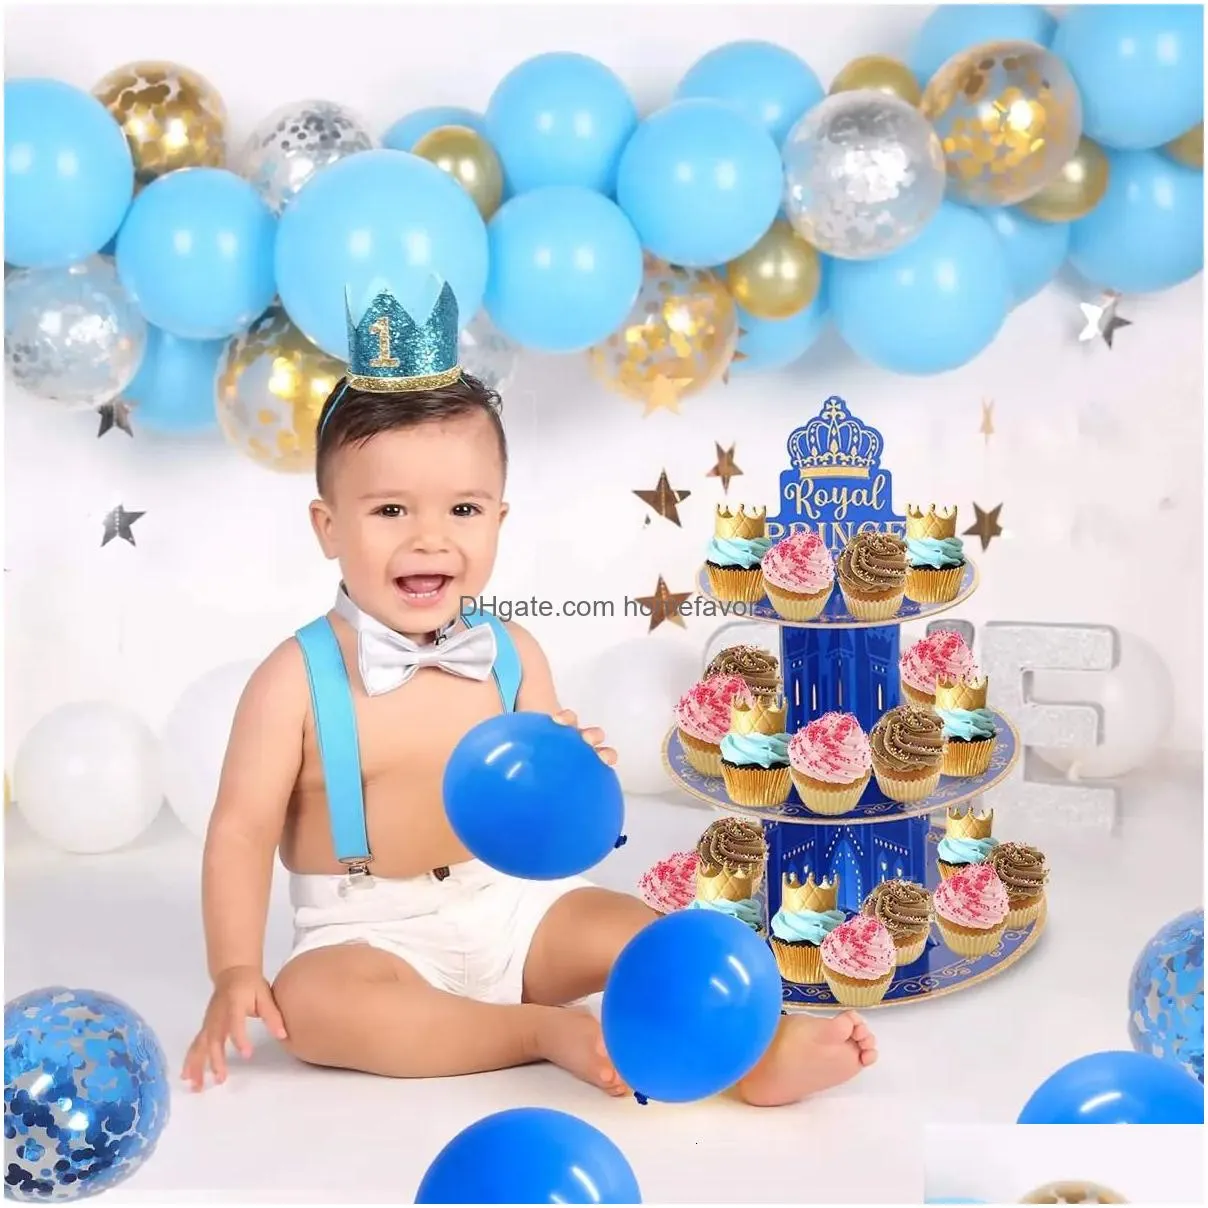 other event party supplies joymemo royal prince cake cupcake stand blue 3-tier cake holder royal prince birthday party baby shower decorations supplies